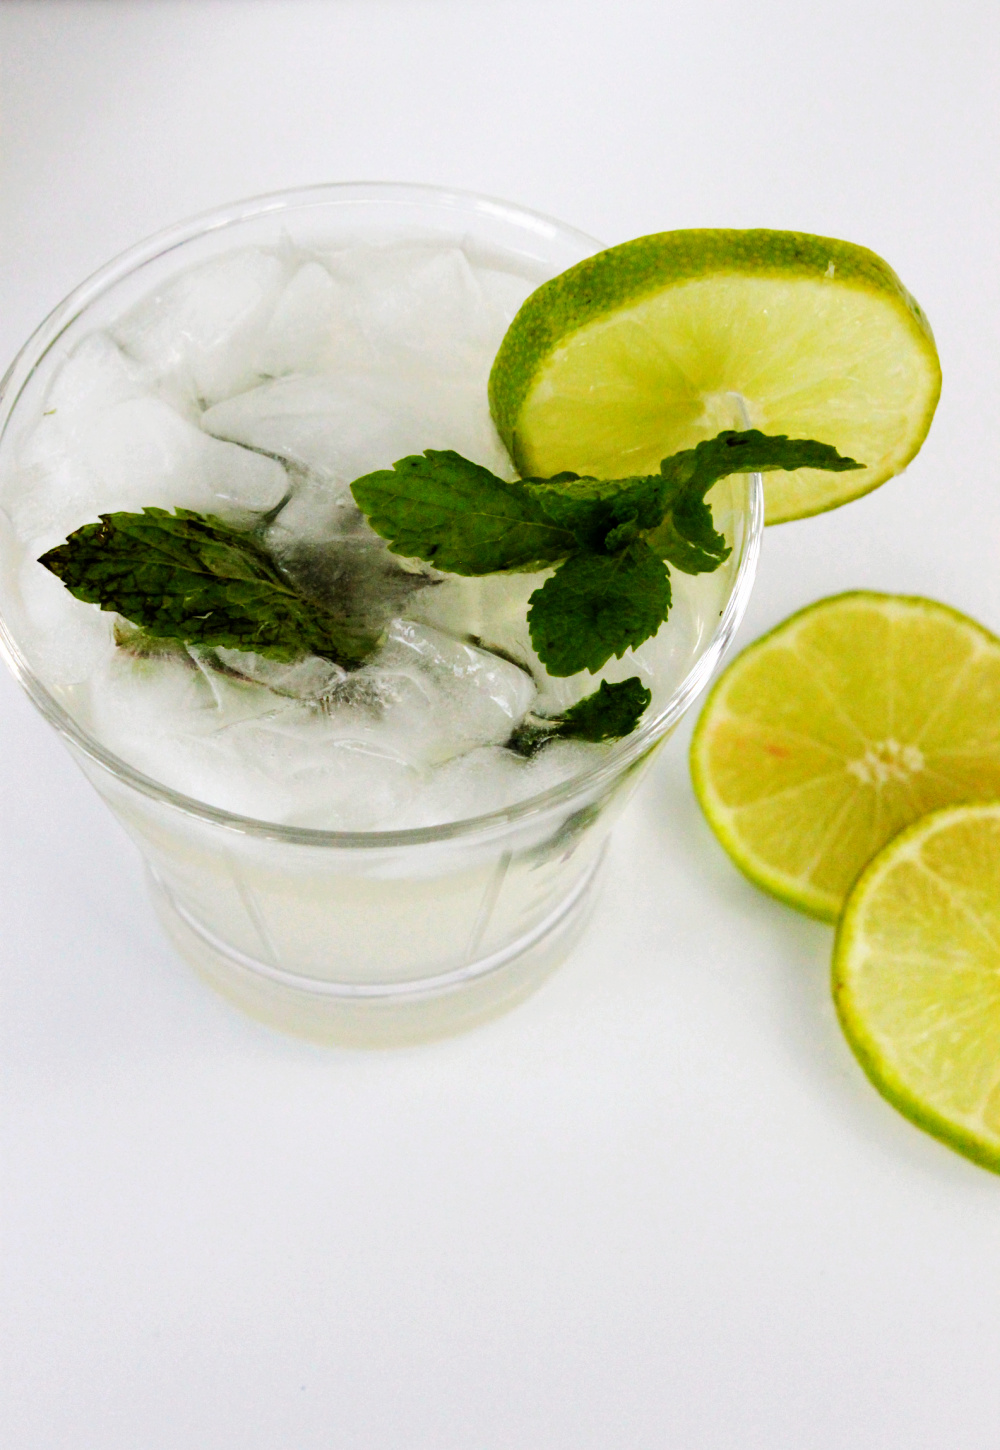 A top view highball glass with a tequila mojito cocktail topped with mint and a slice of a lime. Slice limes are also on the table.